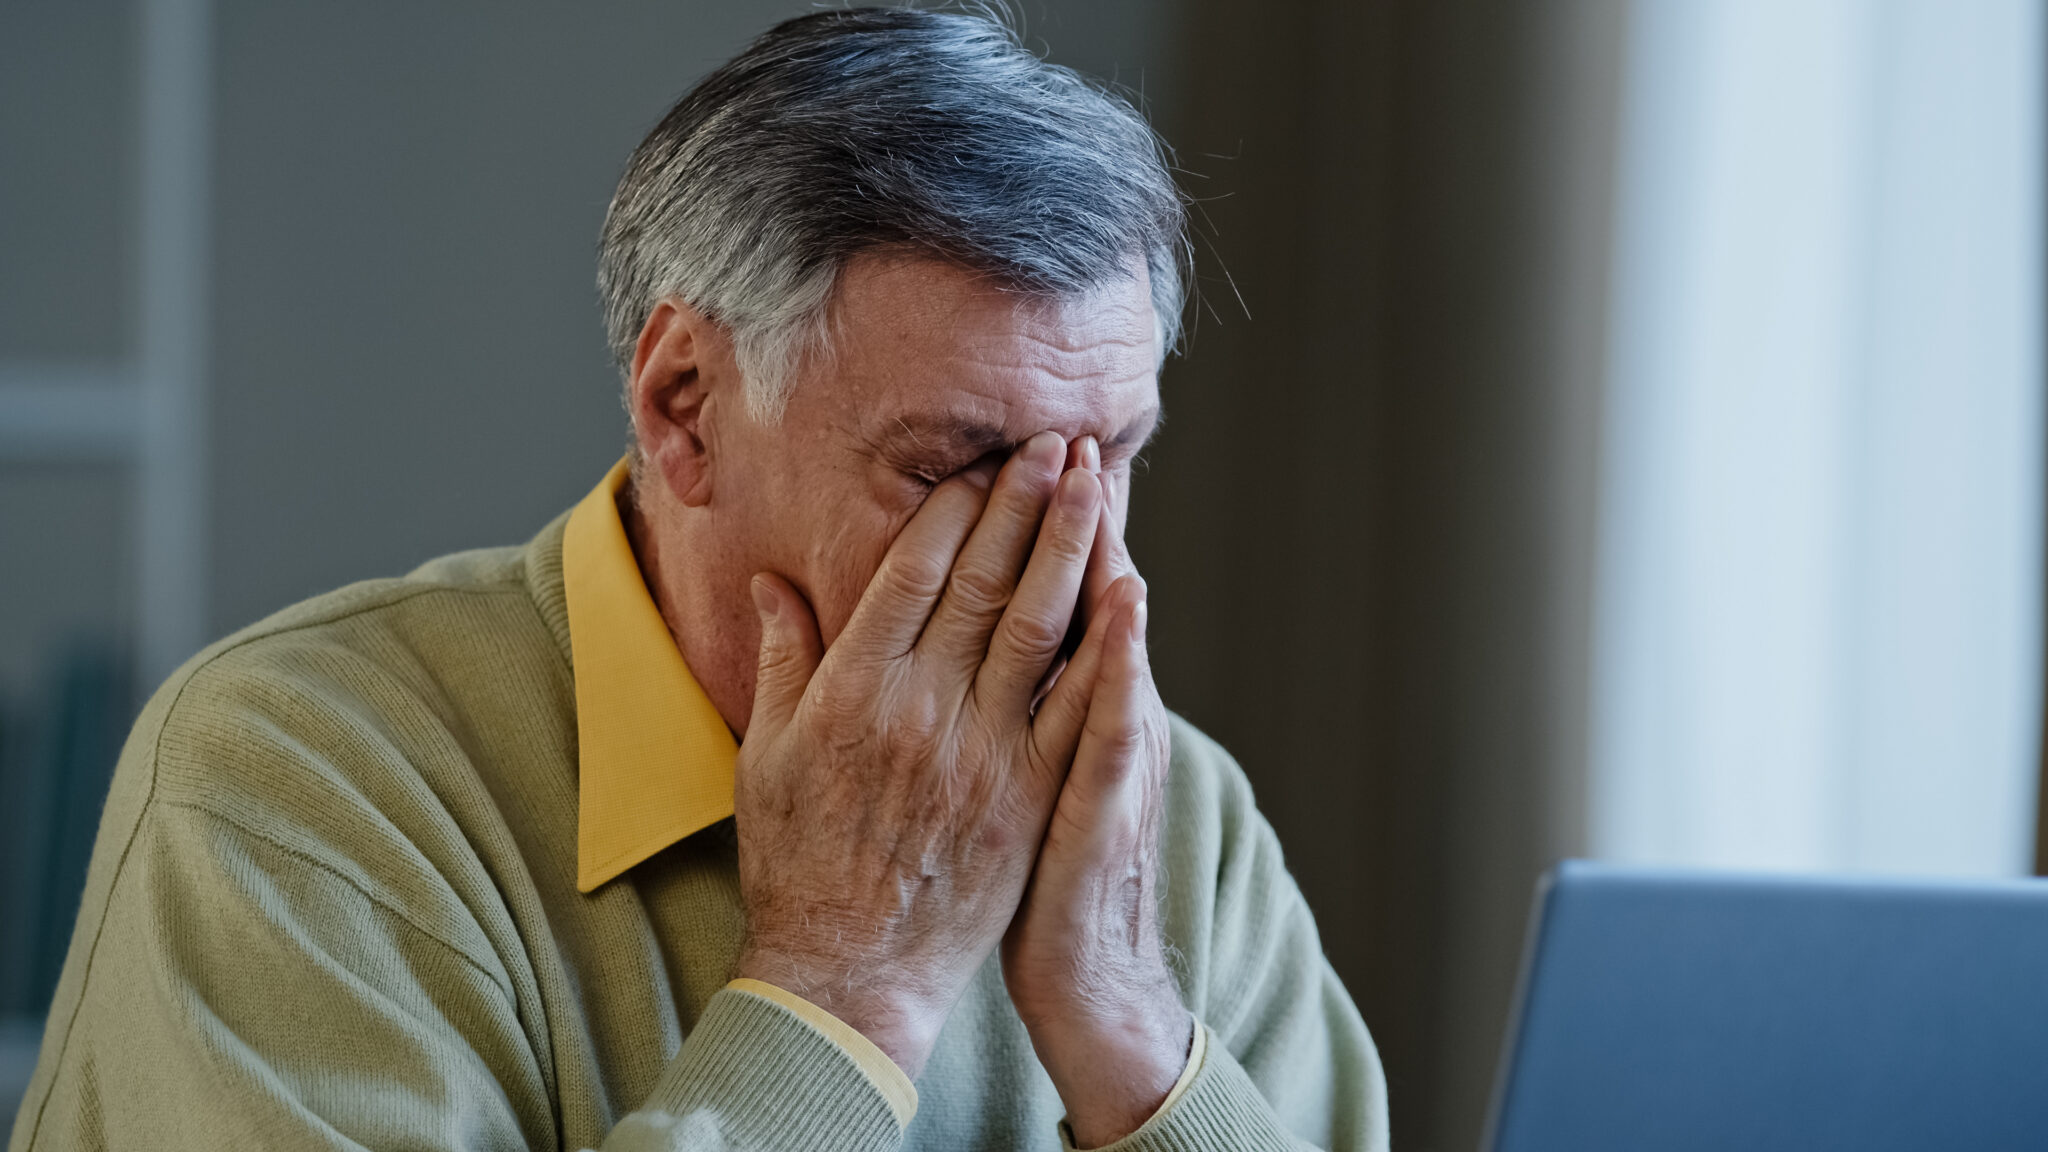 Older businessman with hands folded over his mouth and nose in frustration.